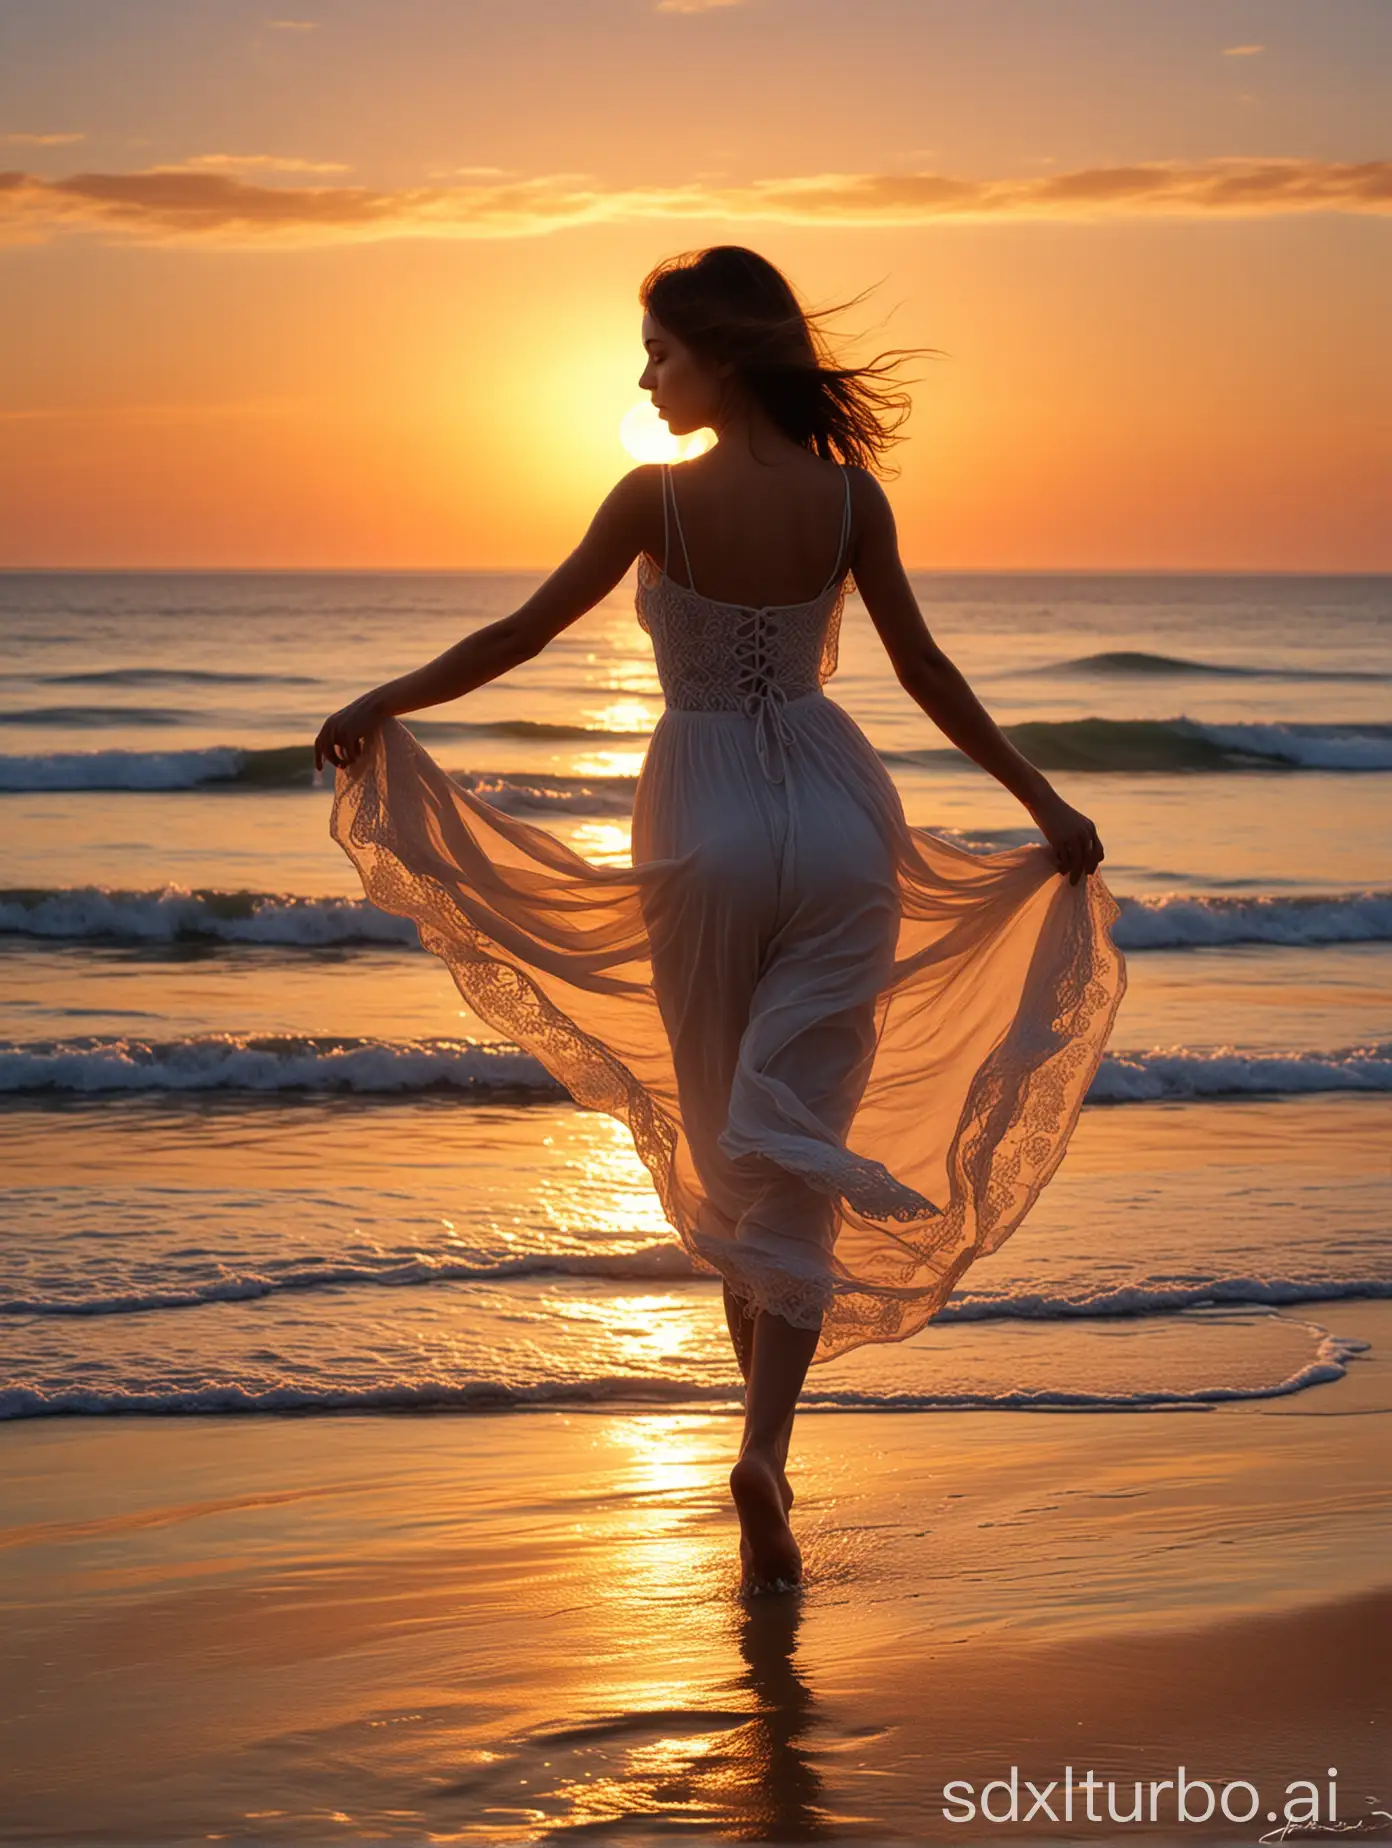 Beautiful scenery, sea, sunset, super delicate, masterpiece, the figure of a girl dancing in the distance, distant shot